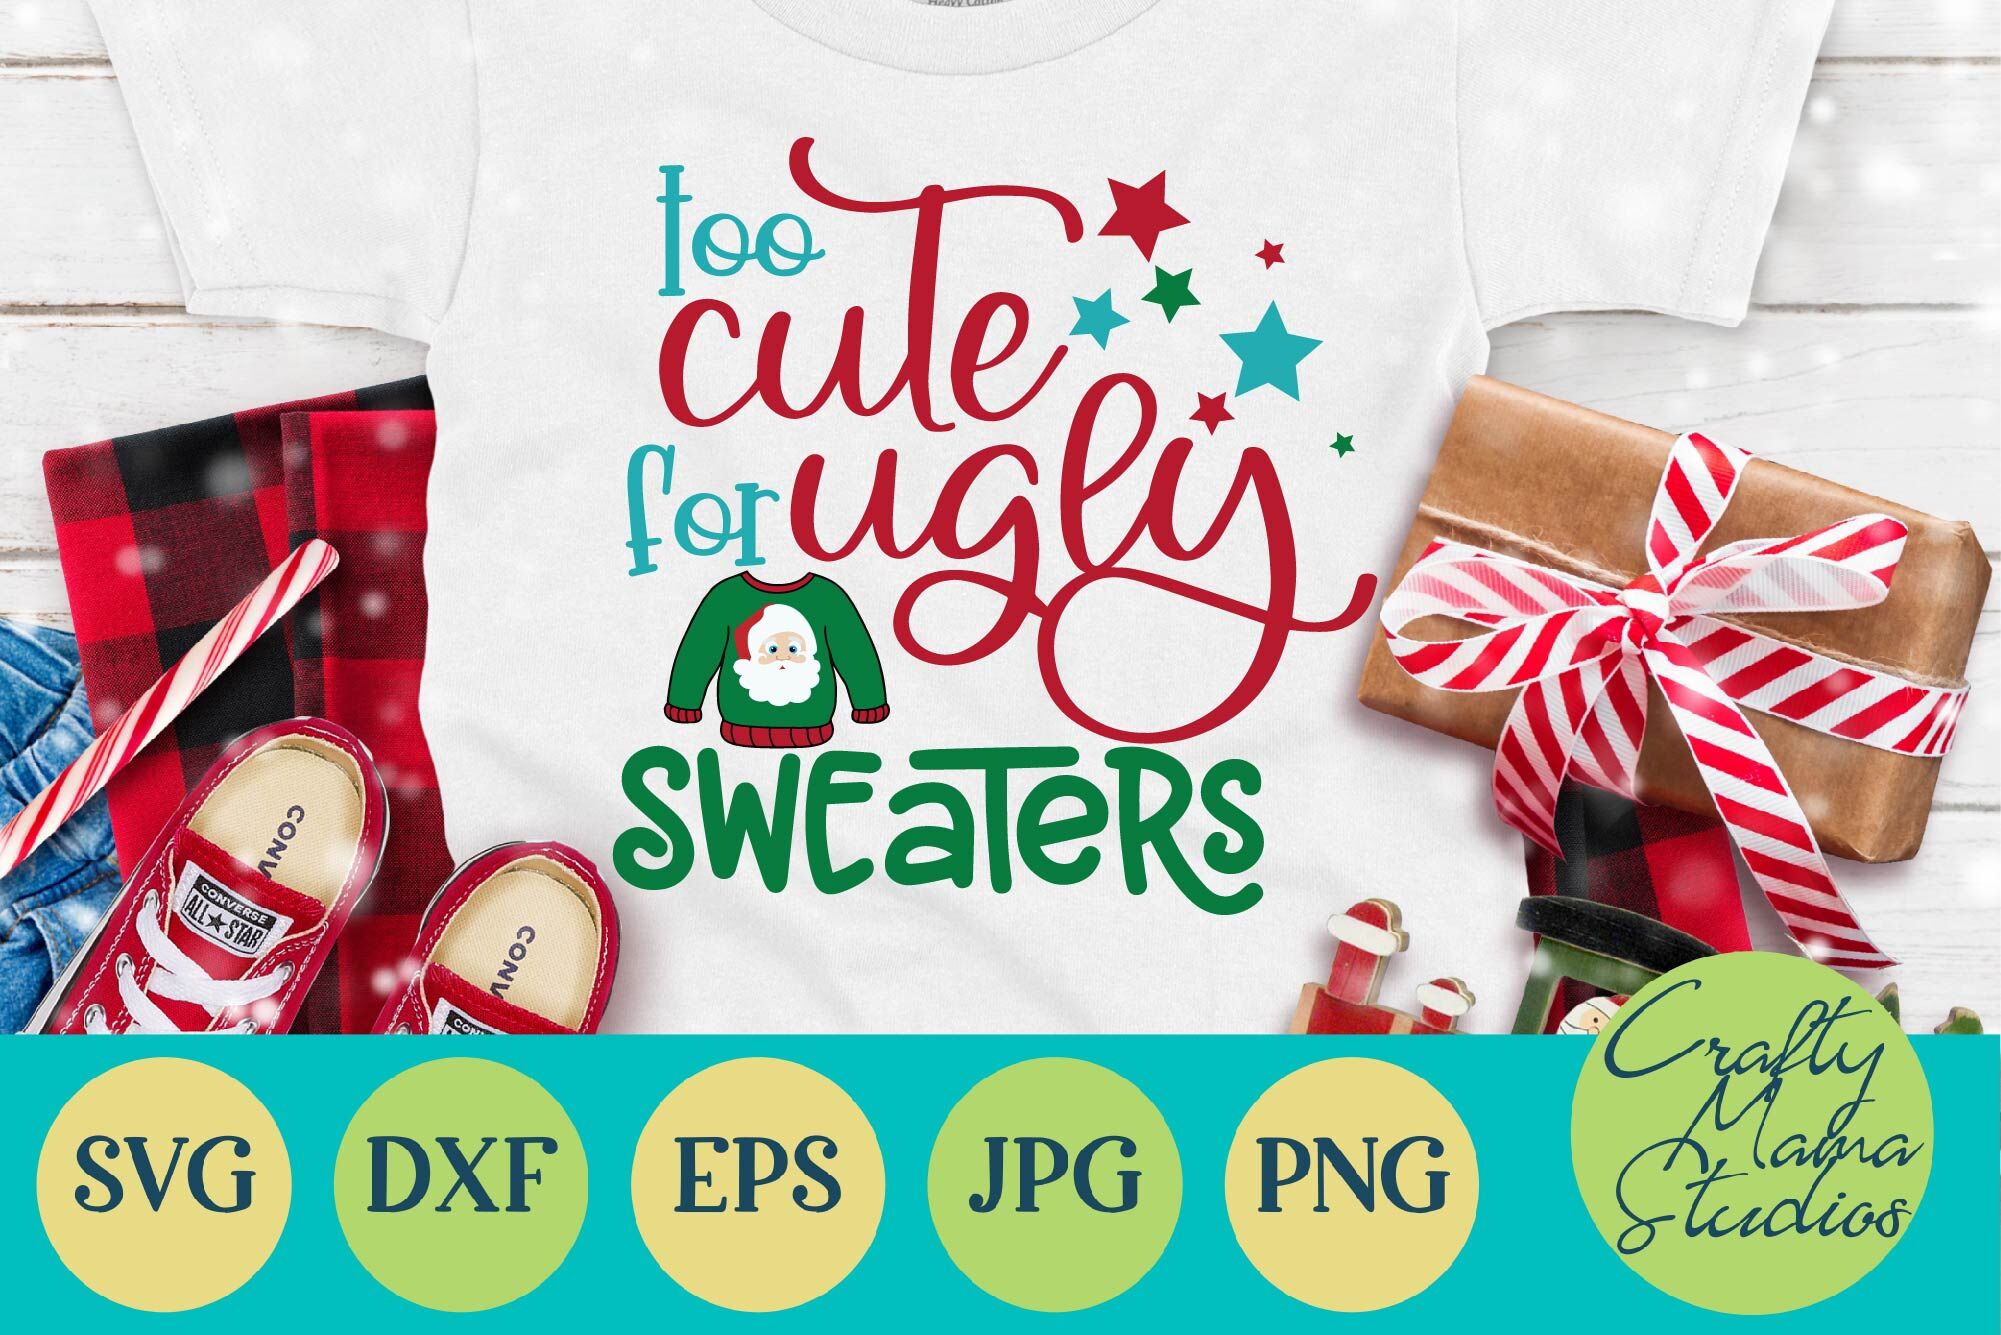 Christmas Svg Too Cute For Ugly Sweaters Christmas Sweater By Crafty Mama Studios Thehungryjpeg Com